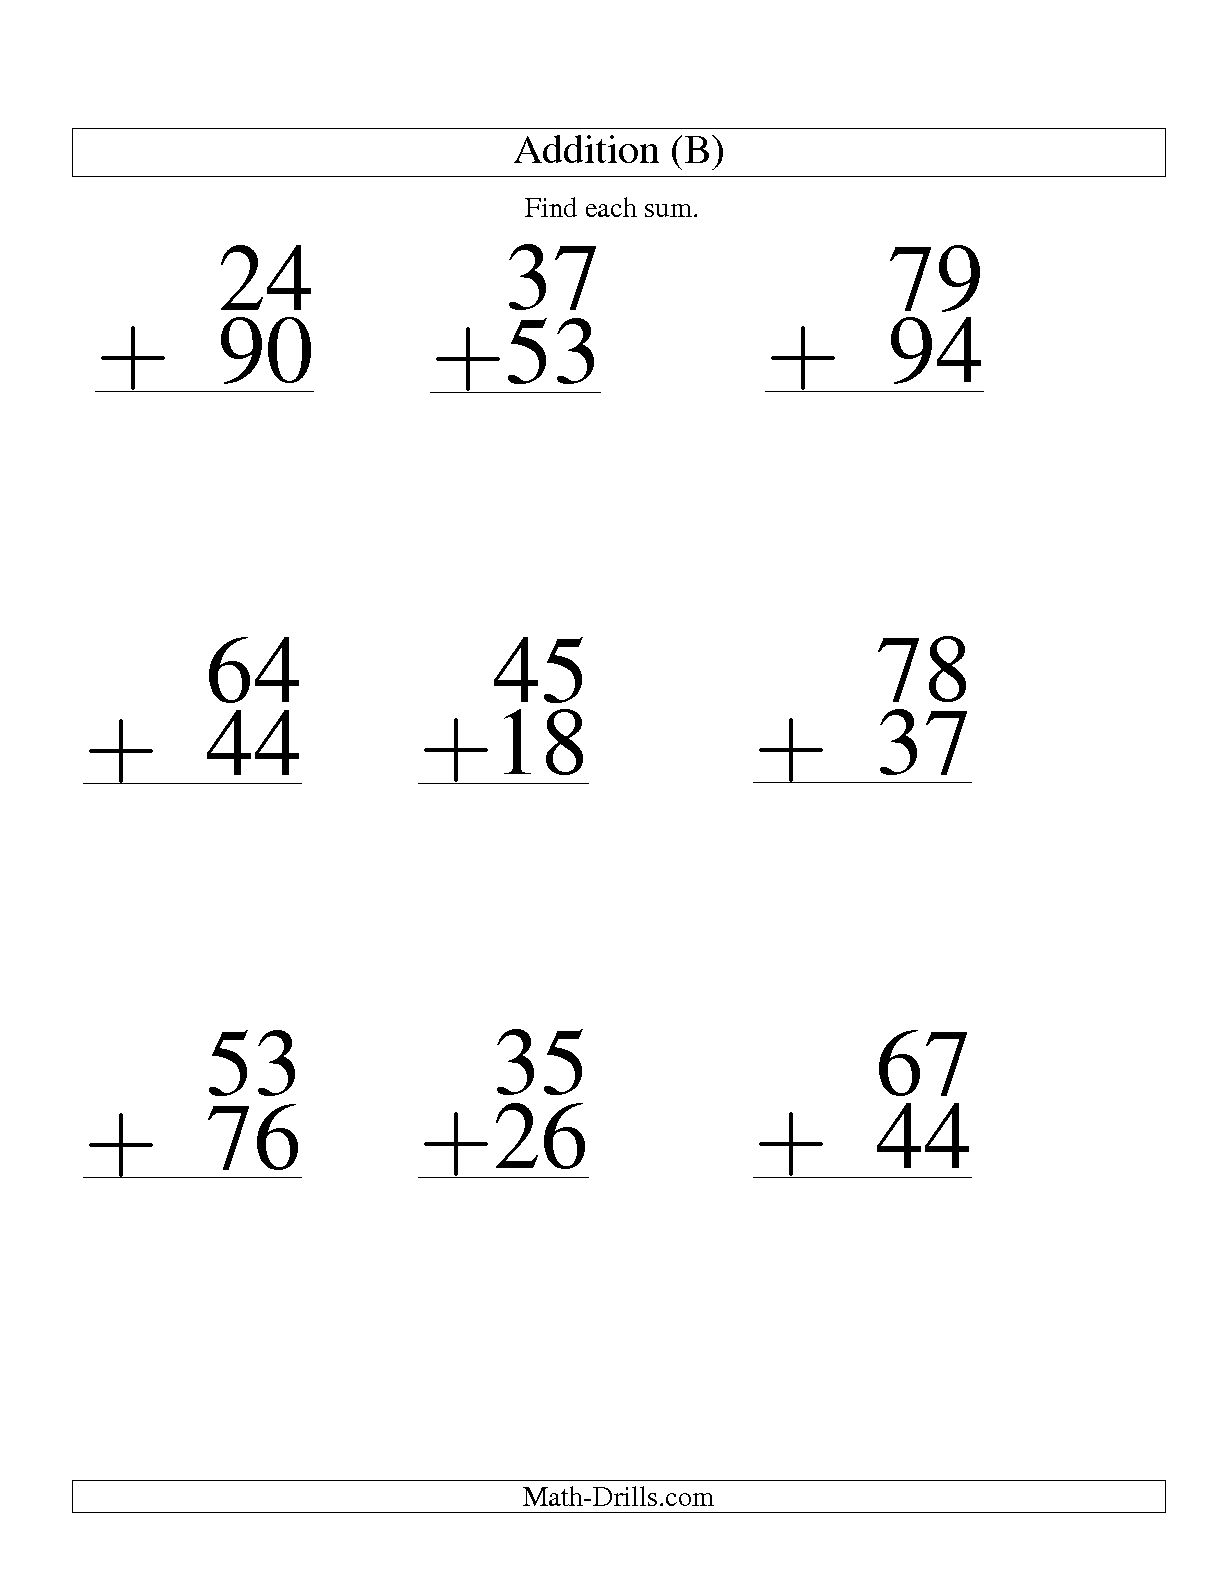 15-best-images-of-9-addition-worksheet-addition-subtraction-fact-family-worksheet-math-drills